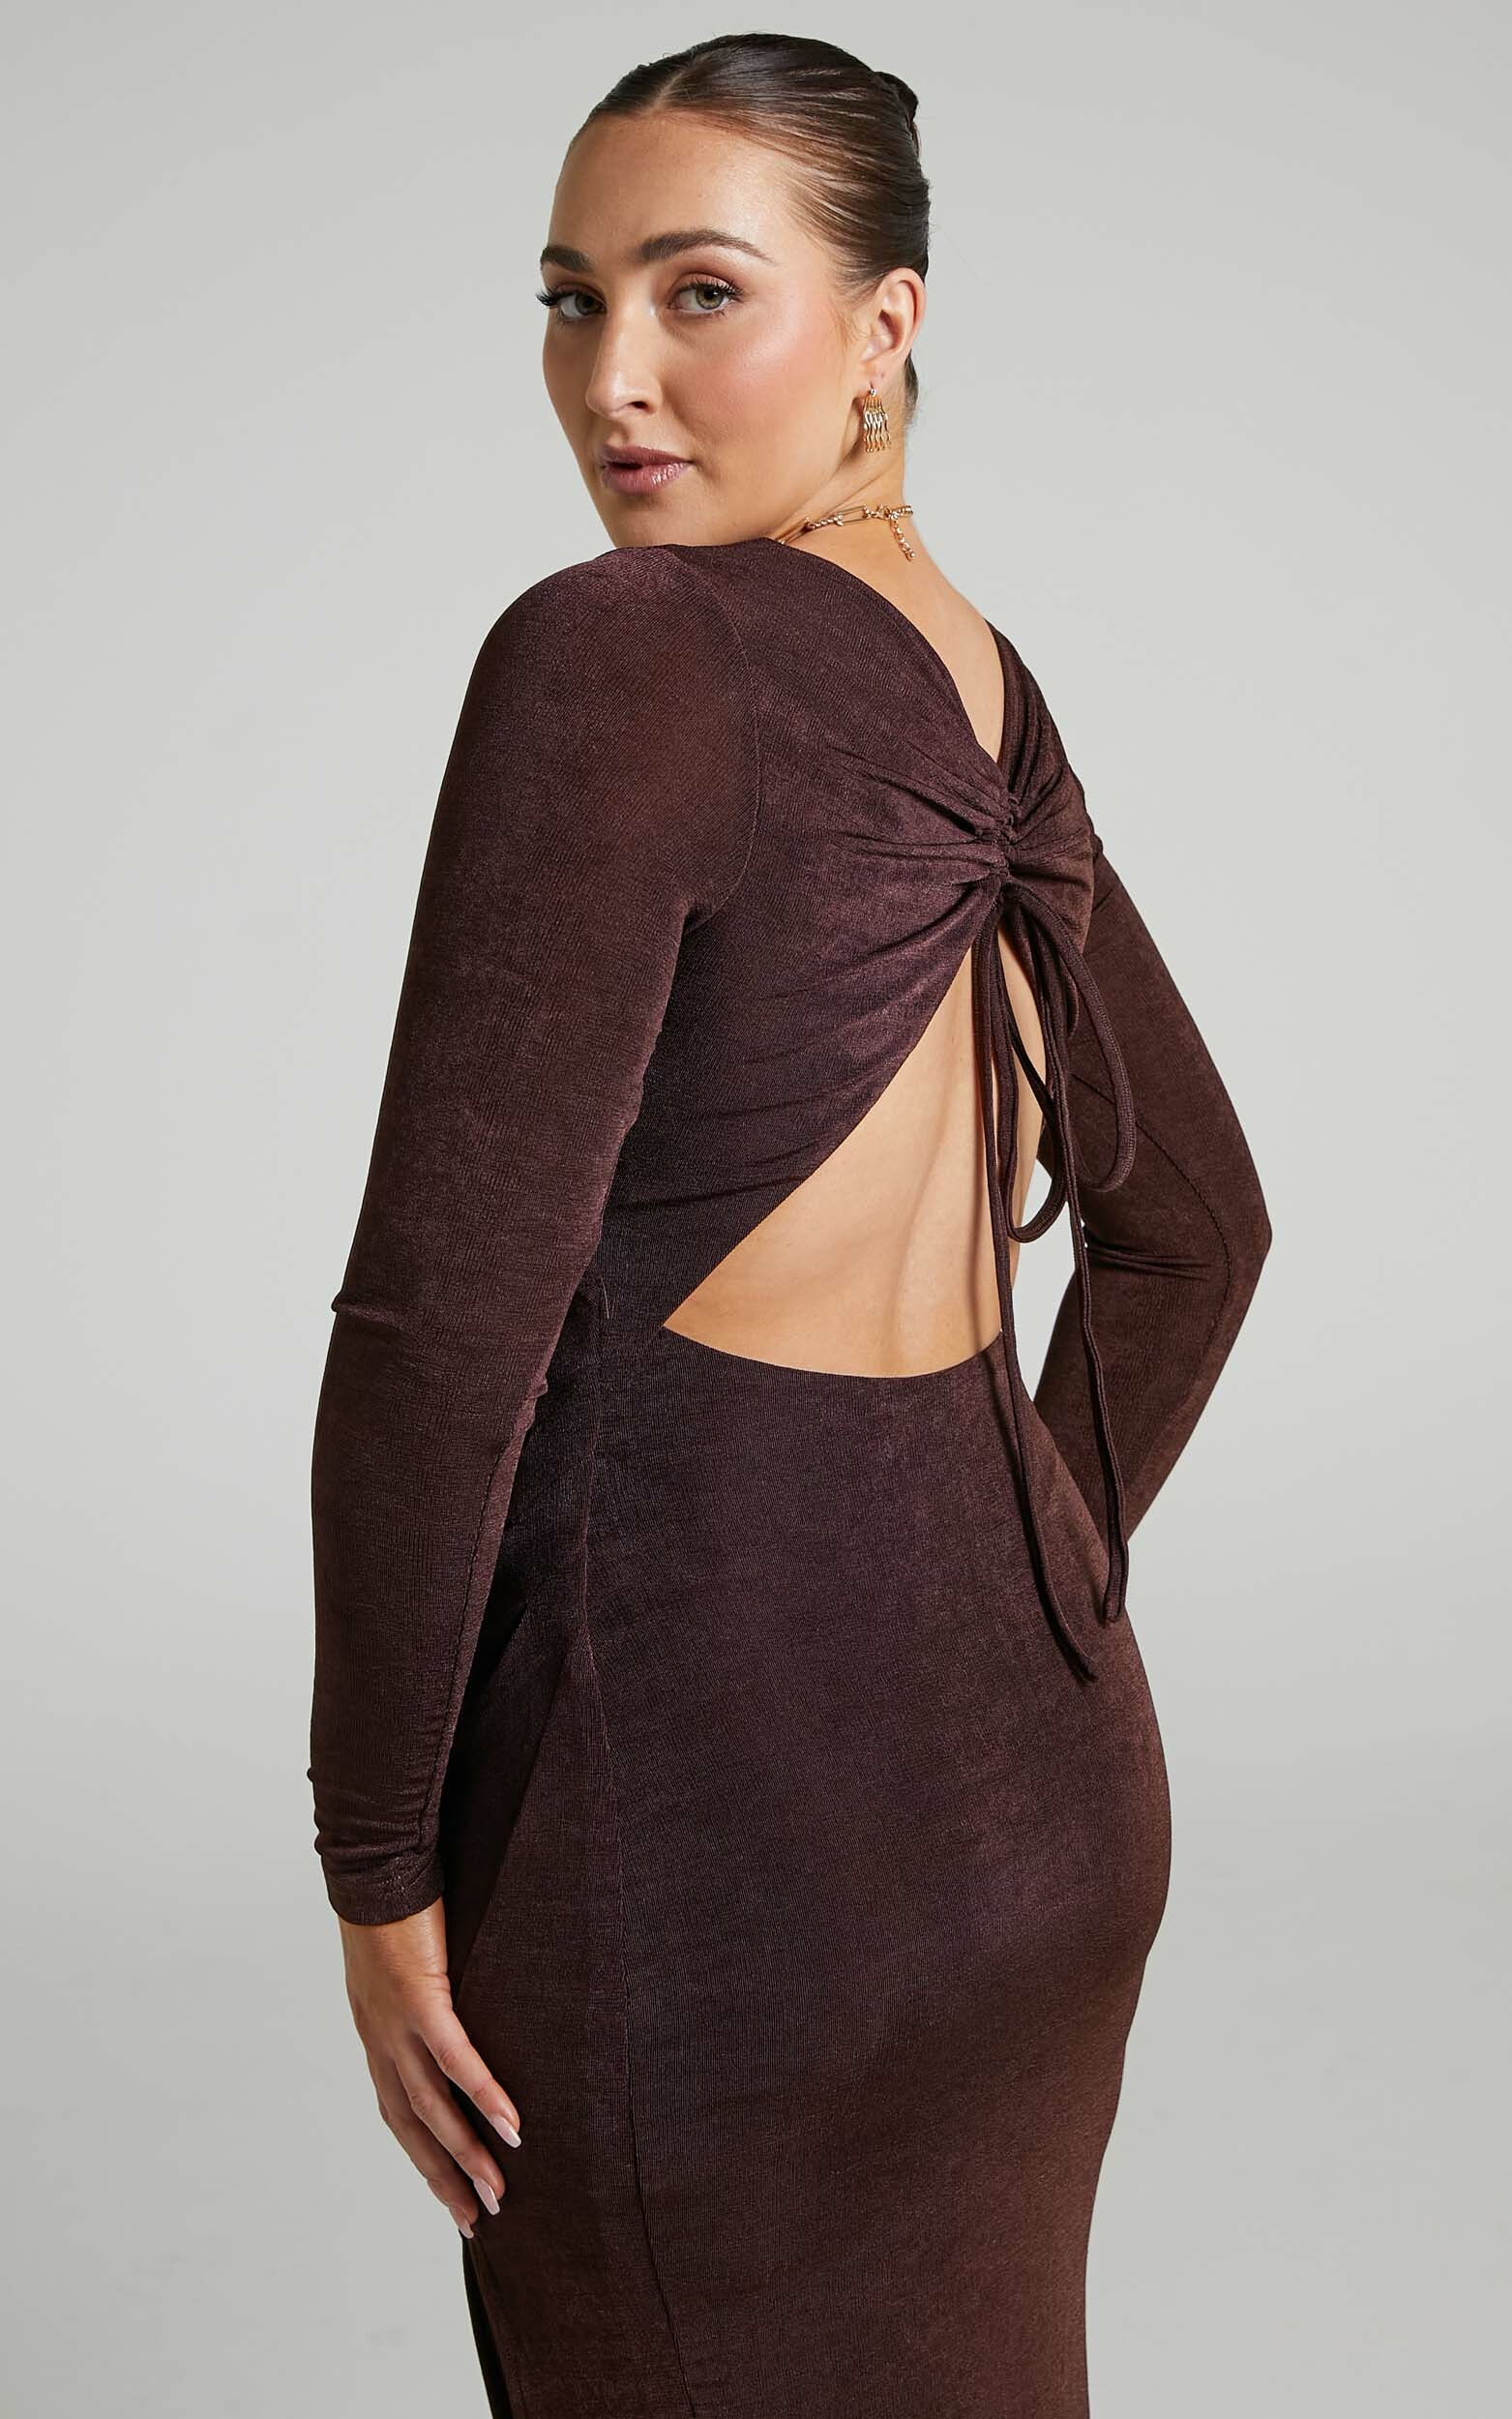 Eulalia Drawstring Open Back Midi Dress in Chocolate - 06, BRN2, hi-res image number null